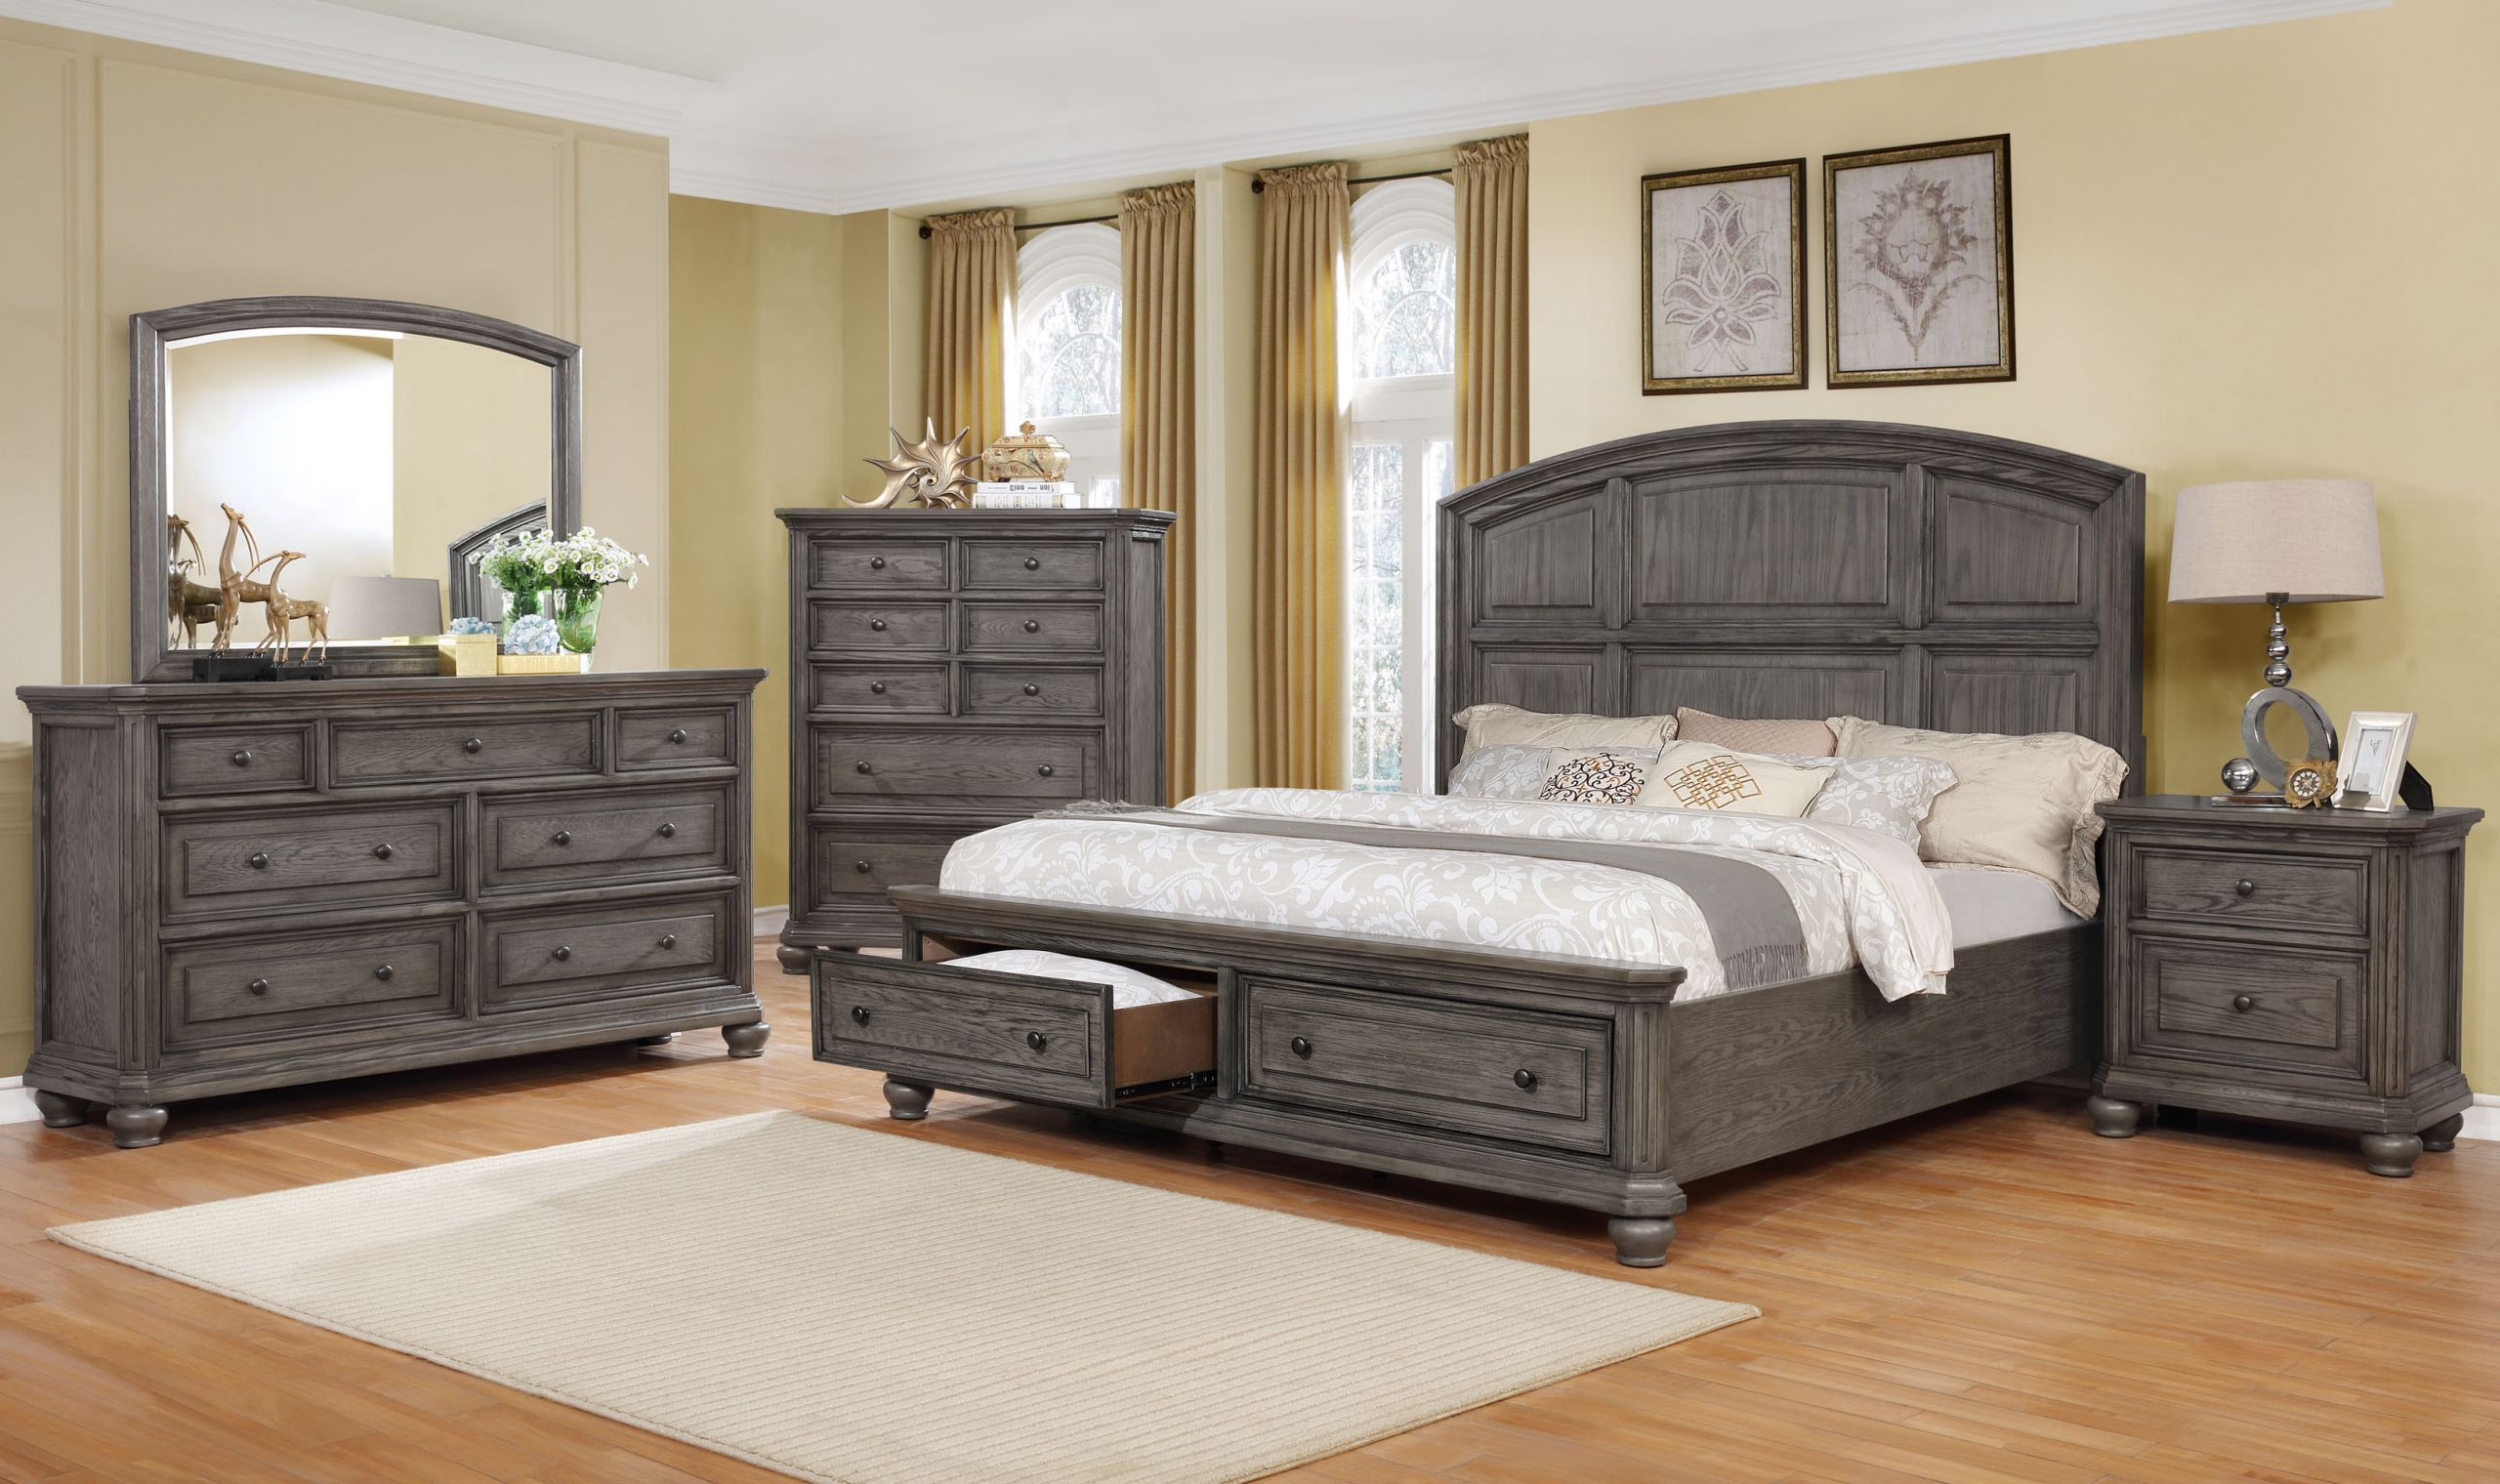 King Bedroom Sets With Storage
 Lavonia Storage Gray King Bedroom Set